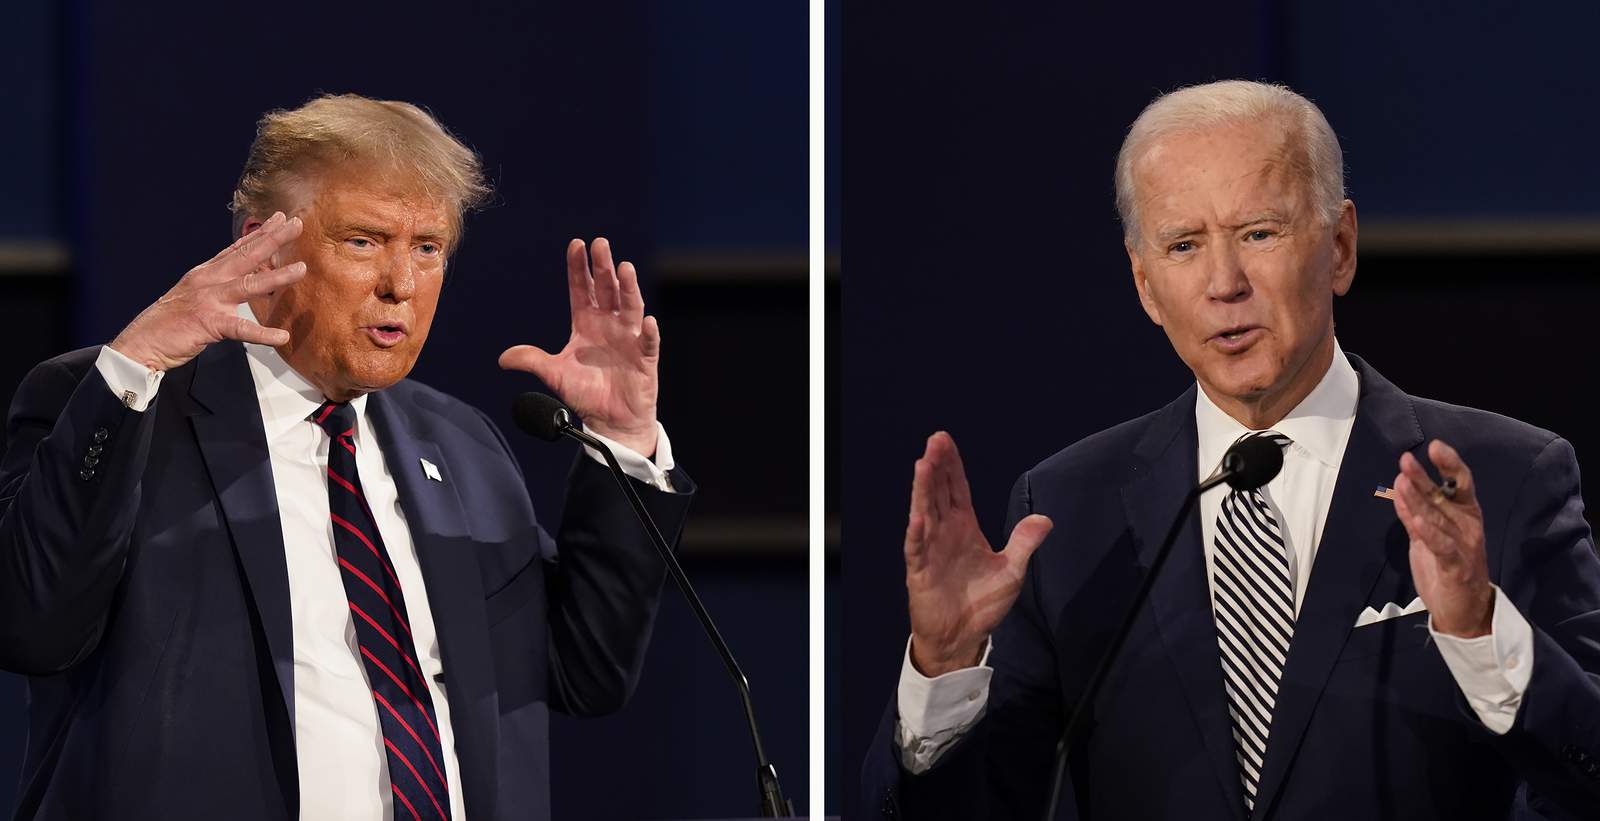 Can Biden or Trump change your mind about them during presidential debates?